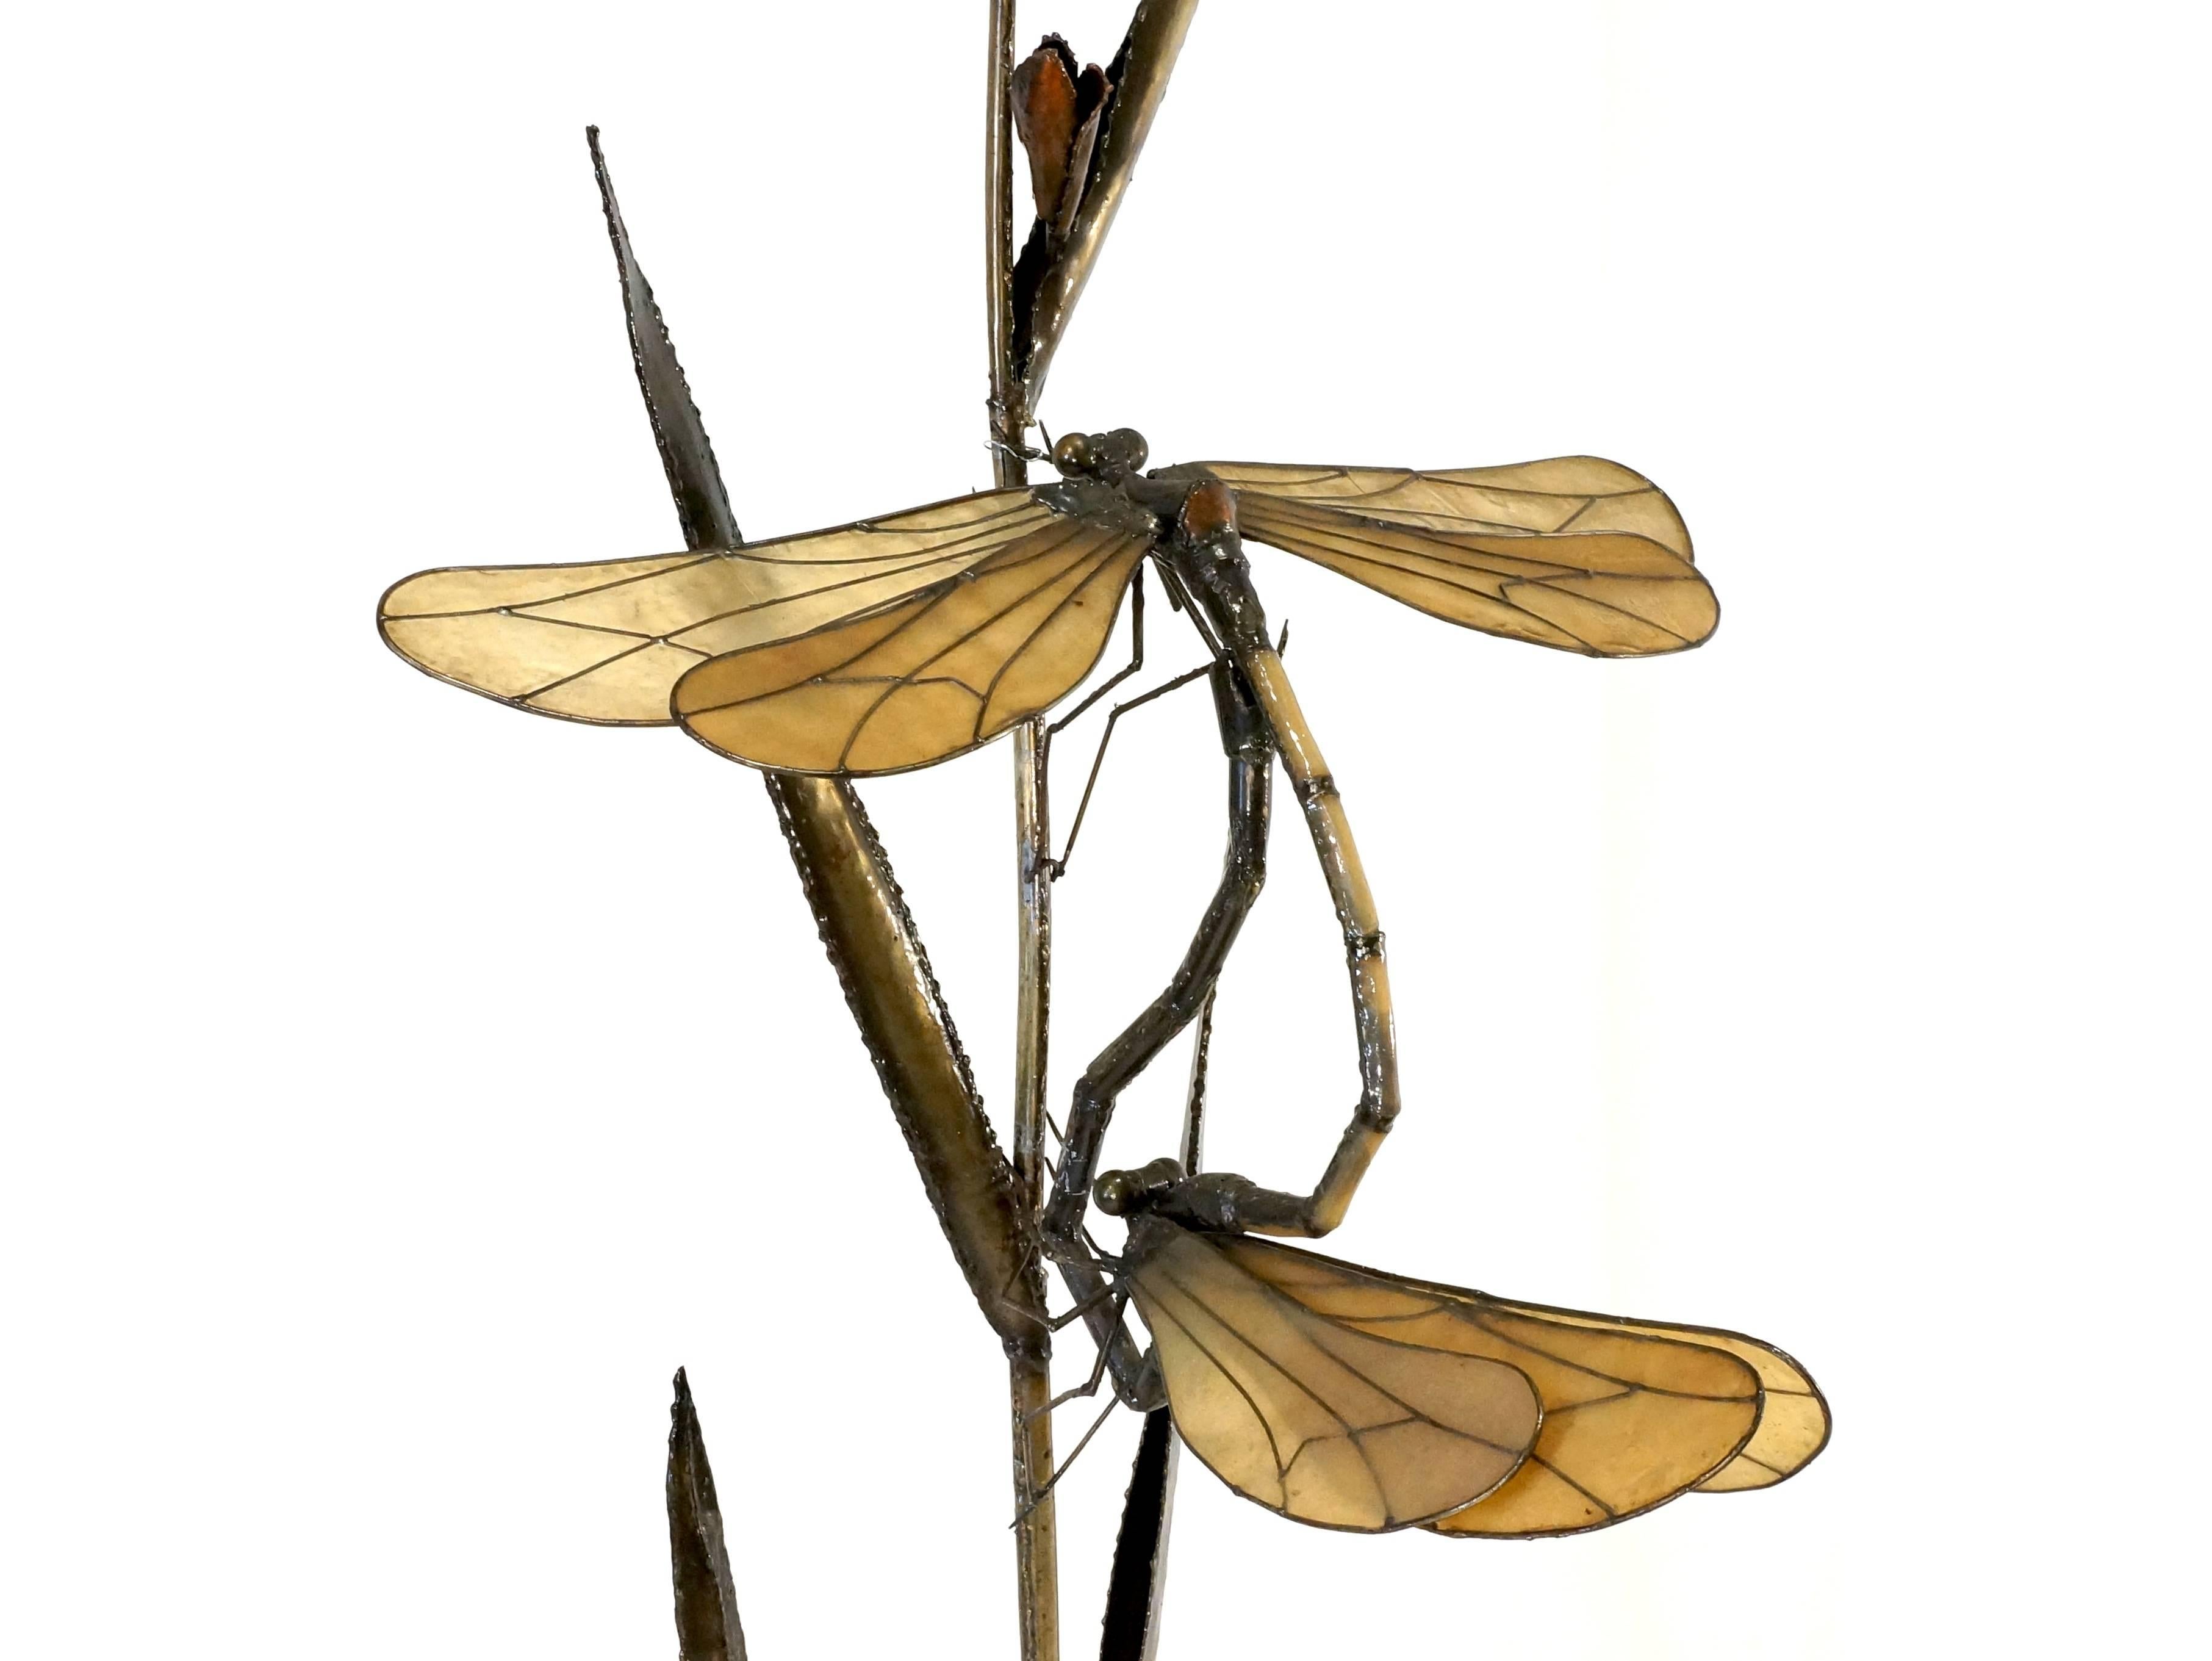 This is one of the Hollywood Regency items we kept for long time in our private collection. The dragonfly sculpture, this metal and brass colored sculpture is made in the 1970s and not signed, for me it looks like the style of Curtis Jere but I know